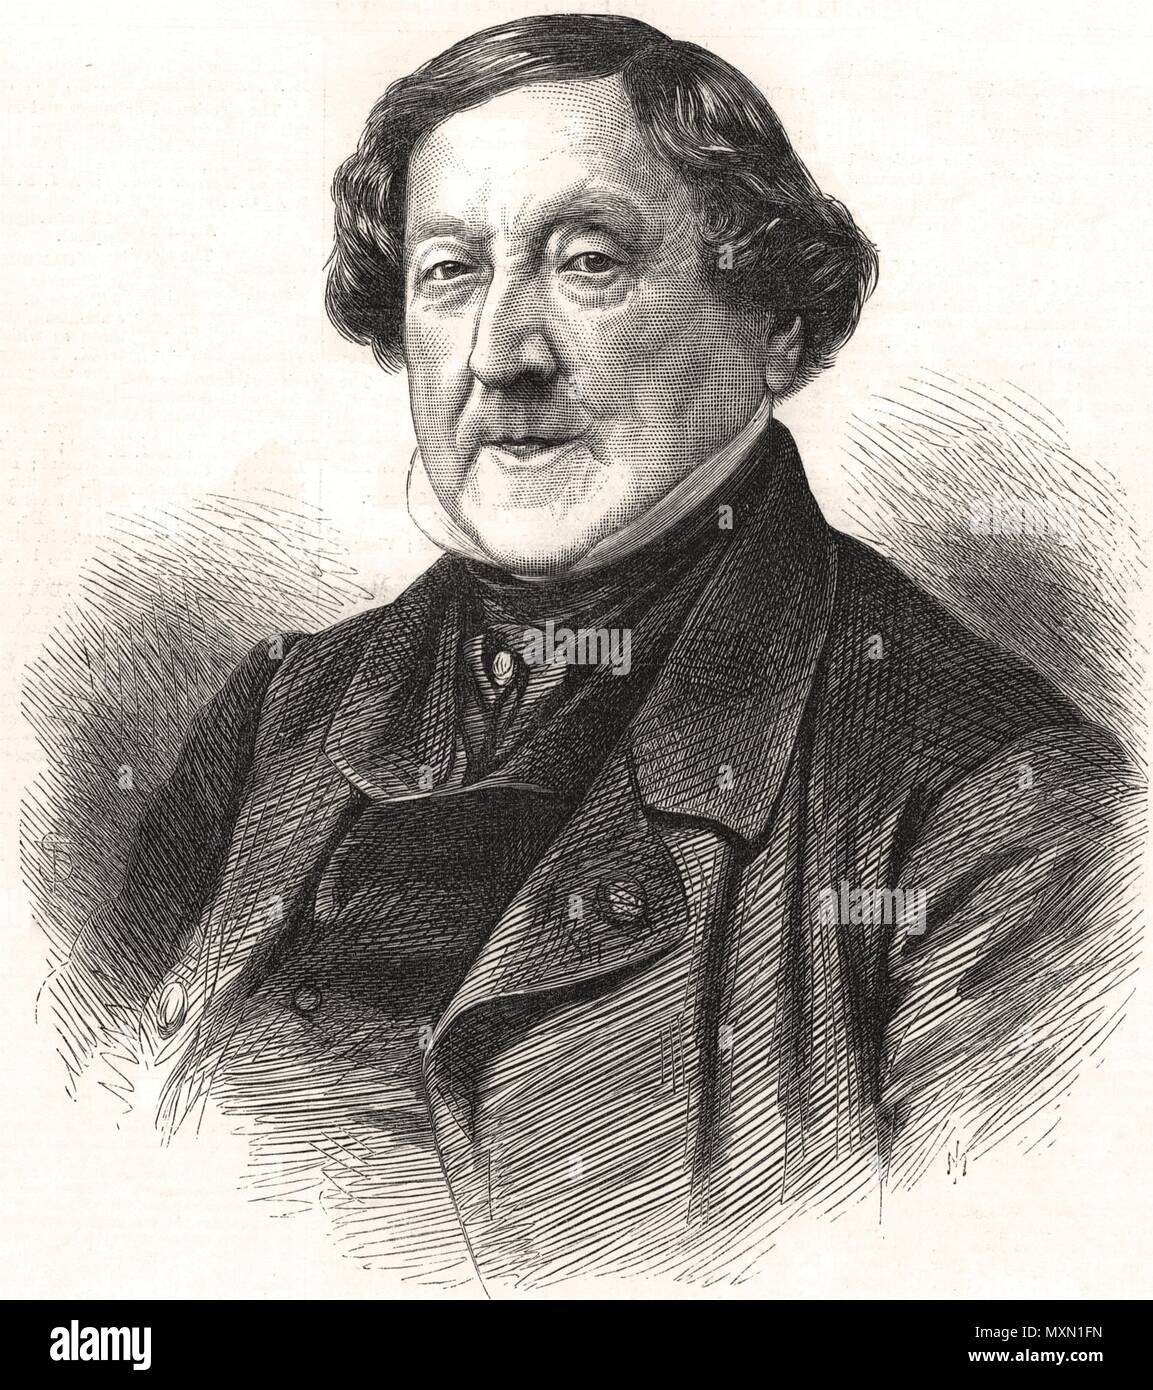 The late Gioacchino Rossini, the composer. Music 1868. The Illustrated London News Stock Photo